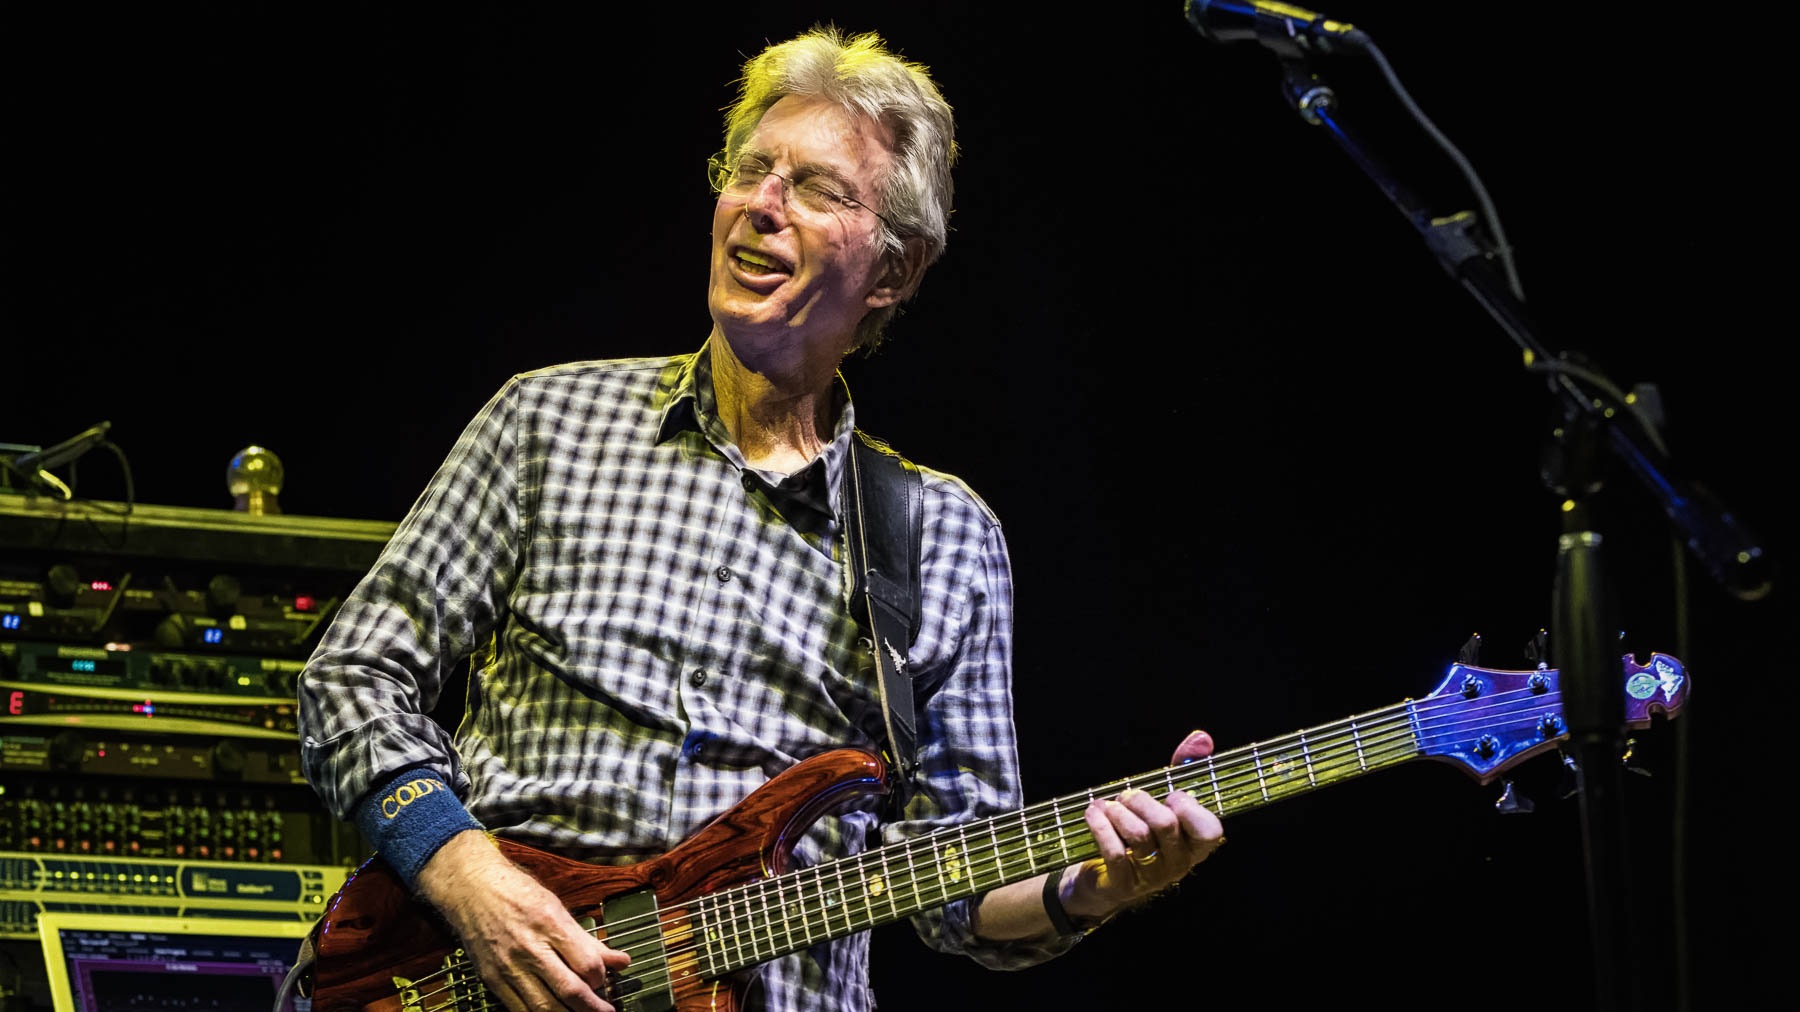 Phil Lesh, renowned for his innovative approach to bass guitar